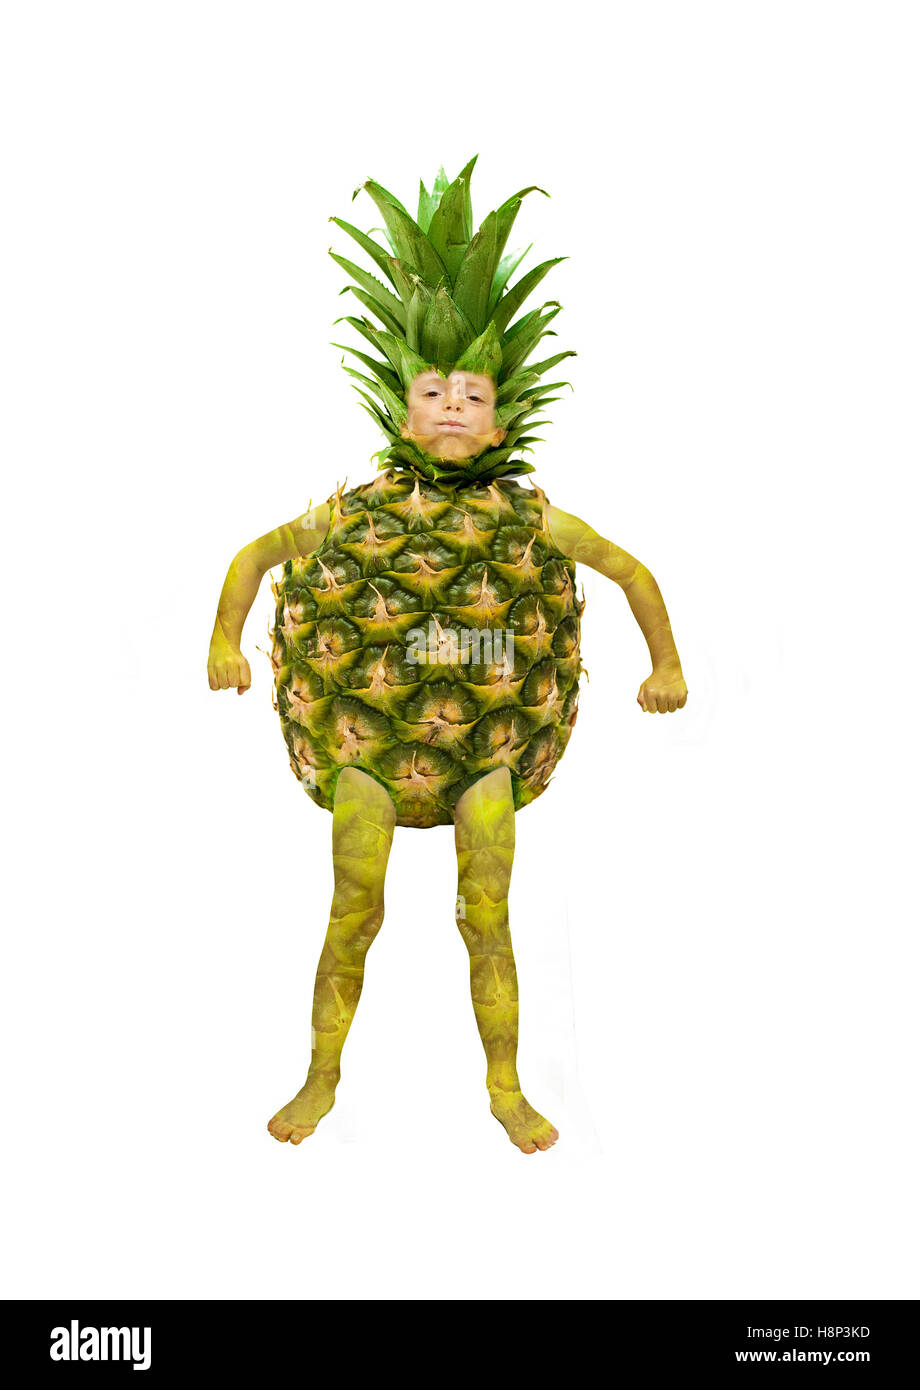 Healthy Food Concept, Child as a Pineapple Stock Photo